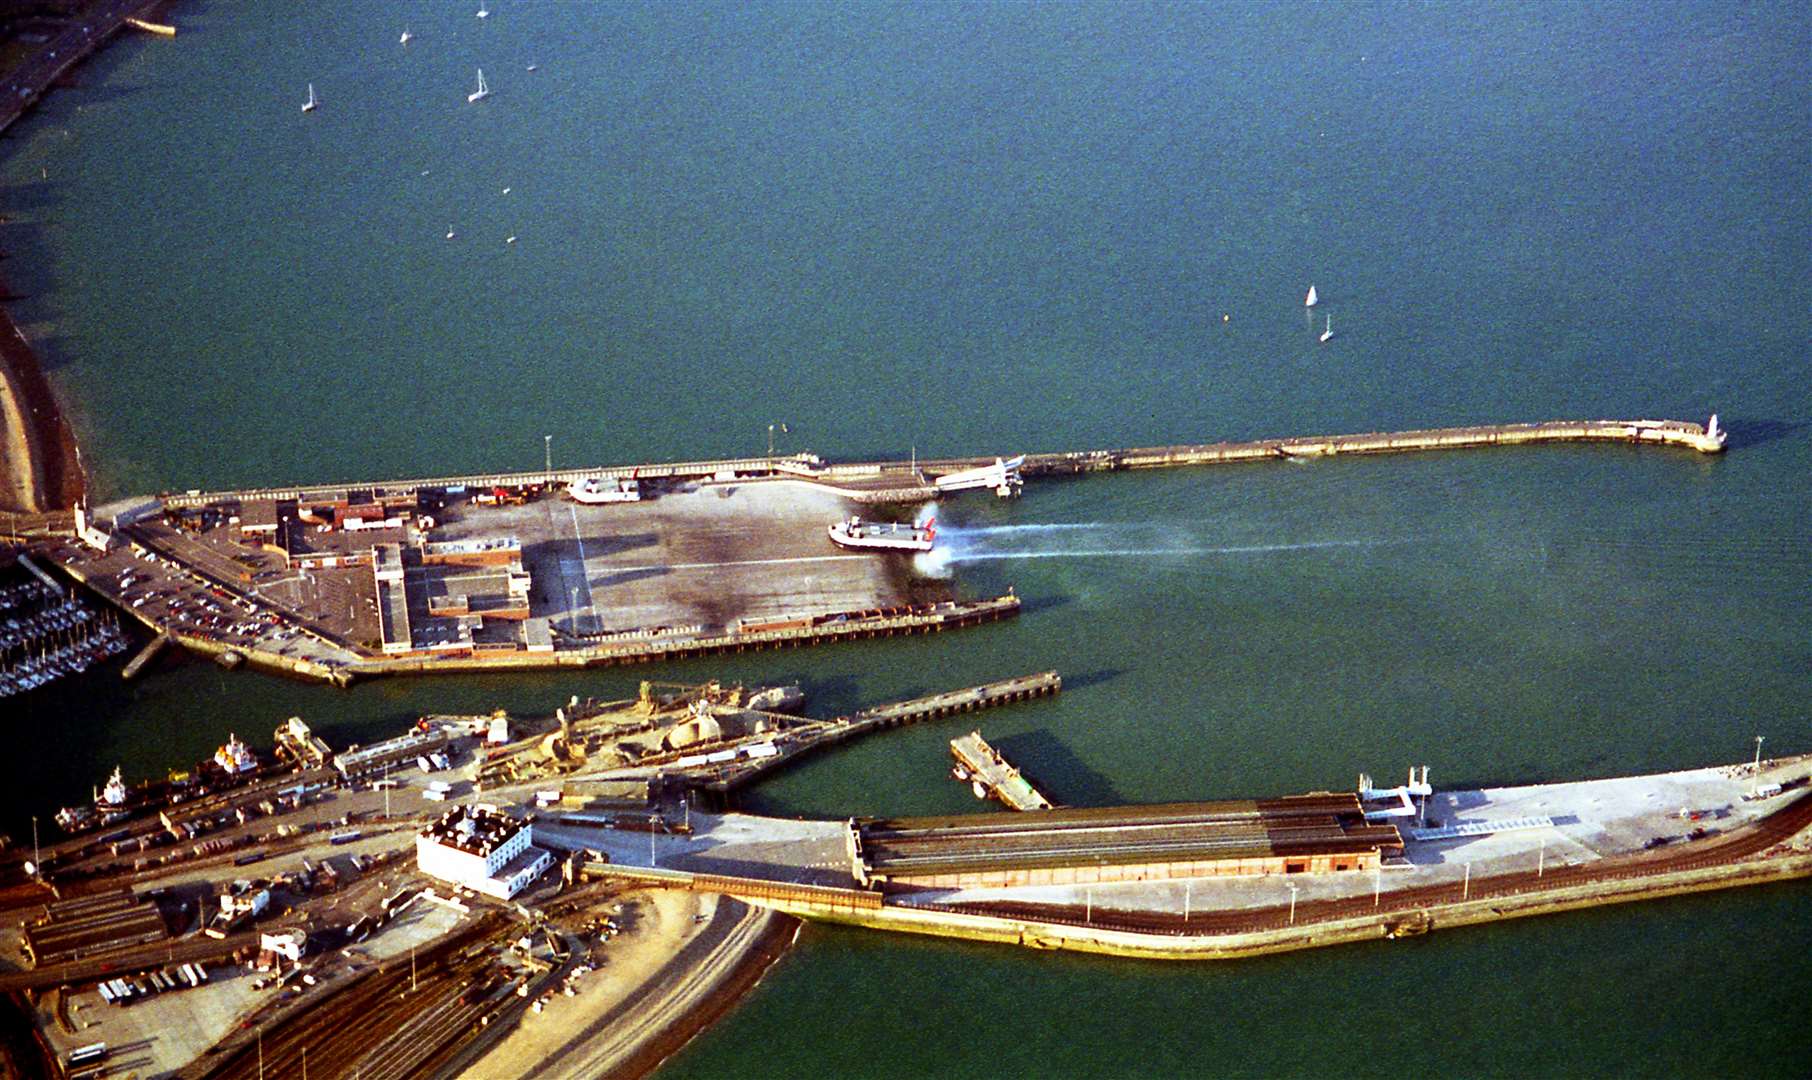 The Port of Dover’s Western Docks in 1997, with what appears to be a hovercraft pictured. Picture: Geoff Hall